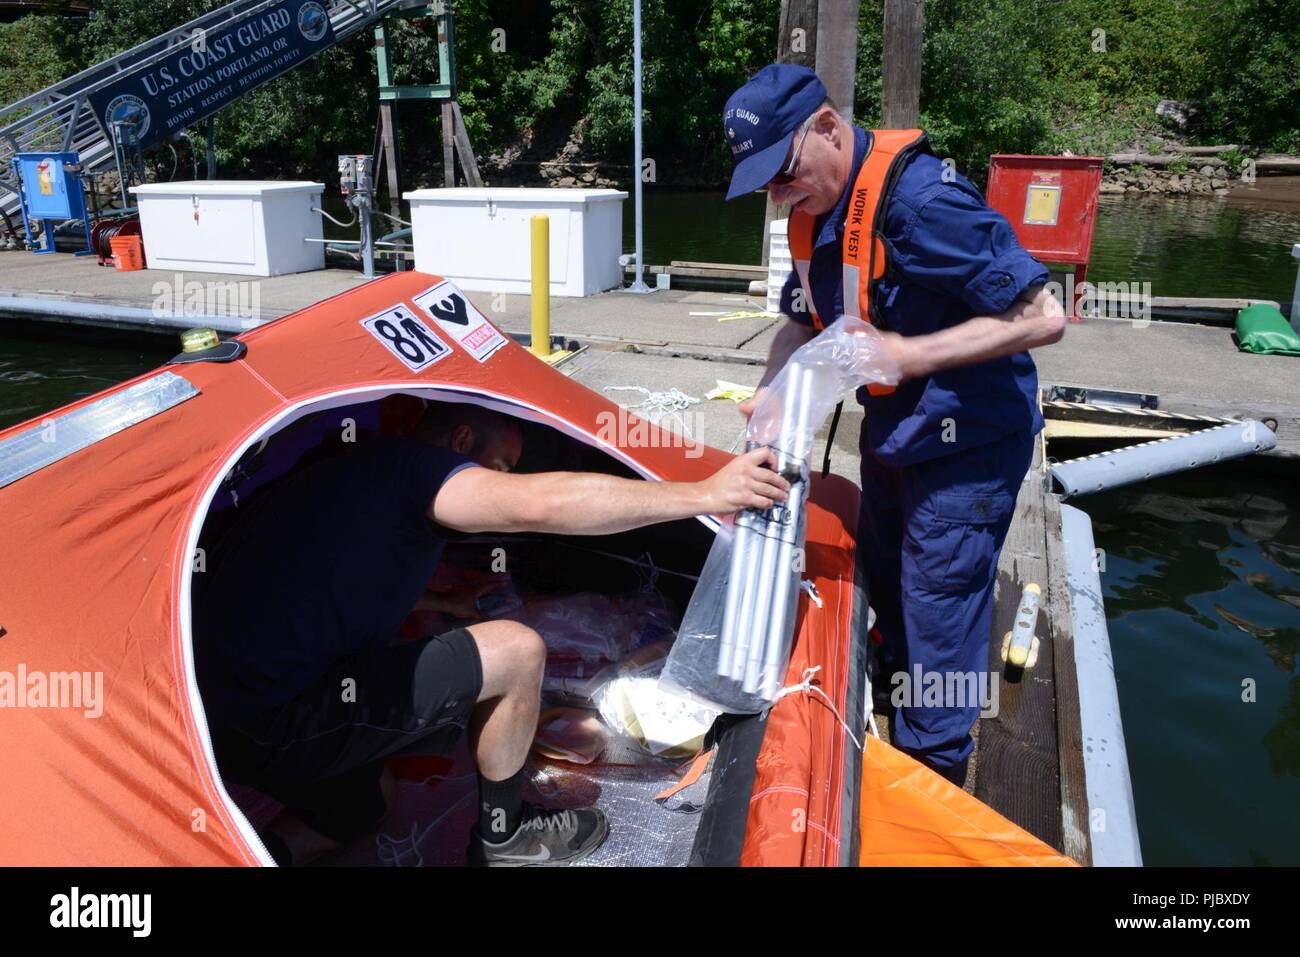 Ron Hilburger, a Coast Guard Auxiliary sector coordinator, assists in the unpacking of survival equipment from an inflatable life raft to showcase for members of the Washington Homeland Security Roundtable at Marine Safety Unit Portland, Ore., July 16, 2018.    The Coast Guard Auxiliary is an all-volunteer organization that acts as a mobile force-multiplier for the Coast Guard's many missions.    U.S. Coast Guard Stock Photo